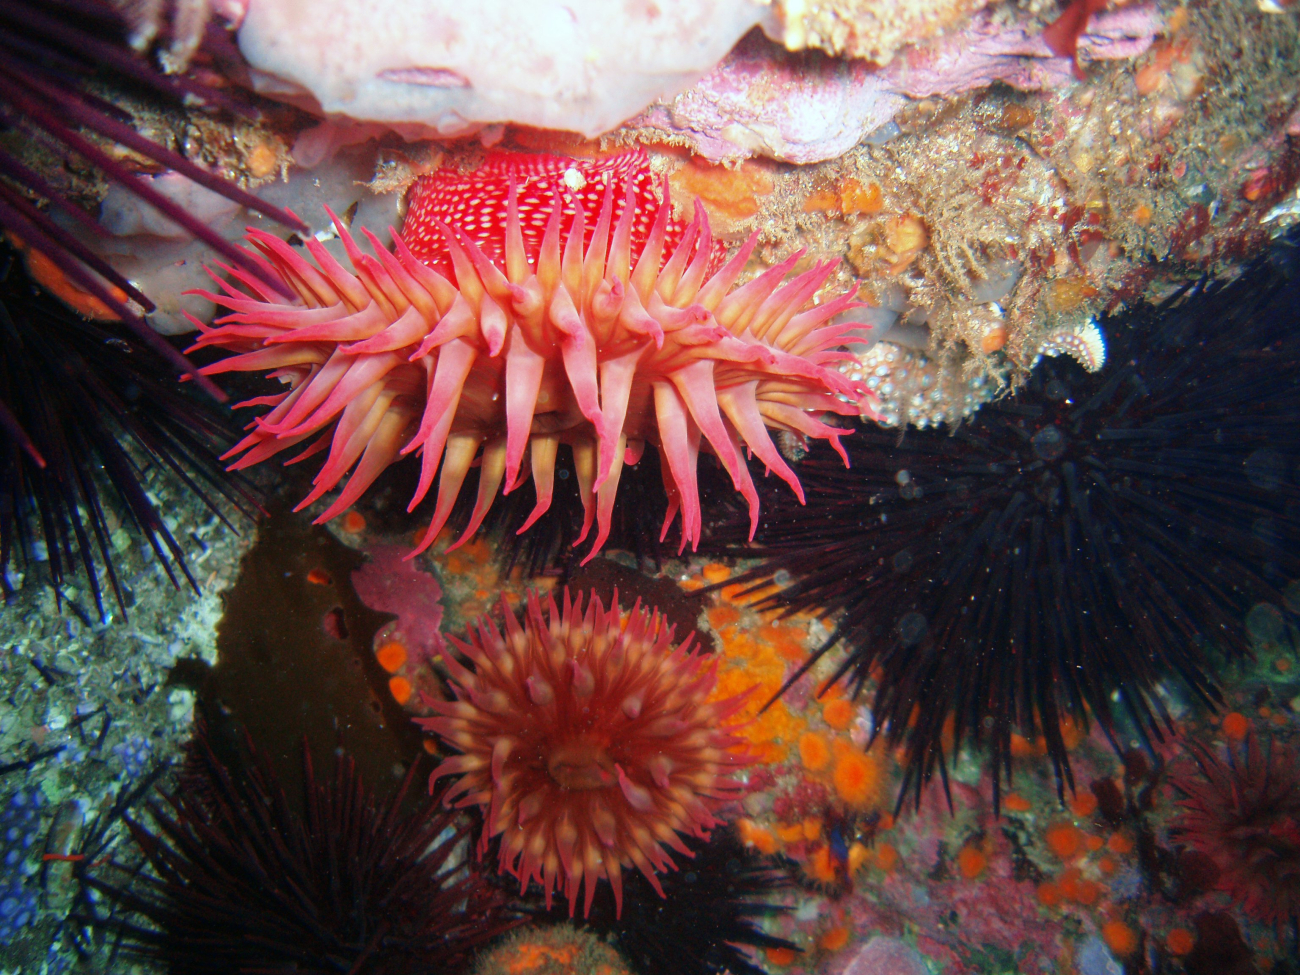 White-spotted anemones and numerous sea urchins